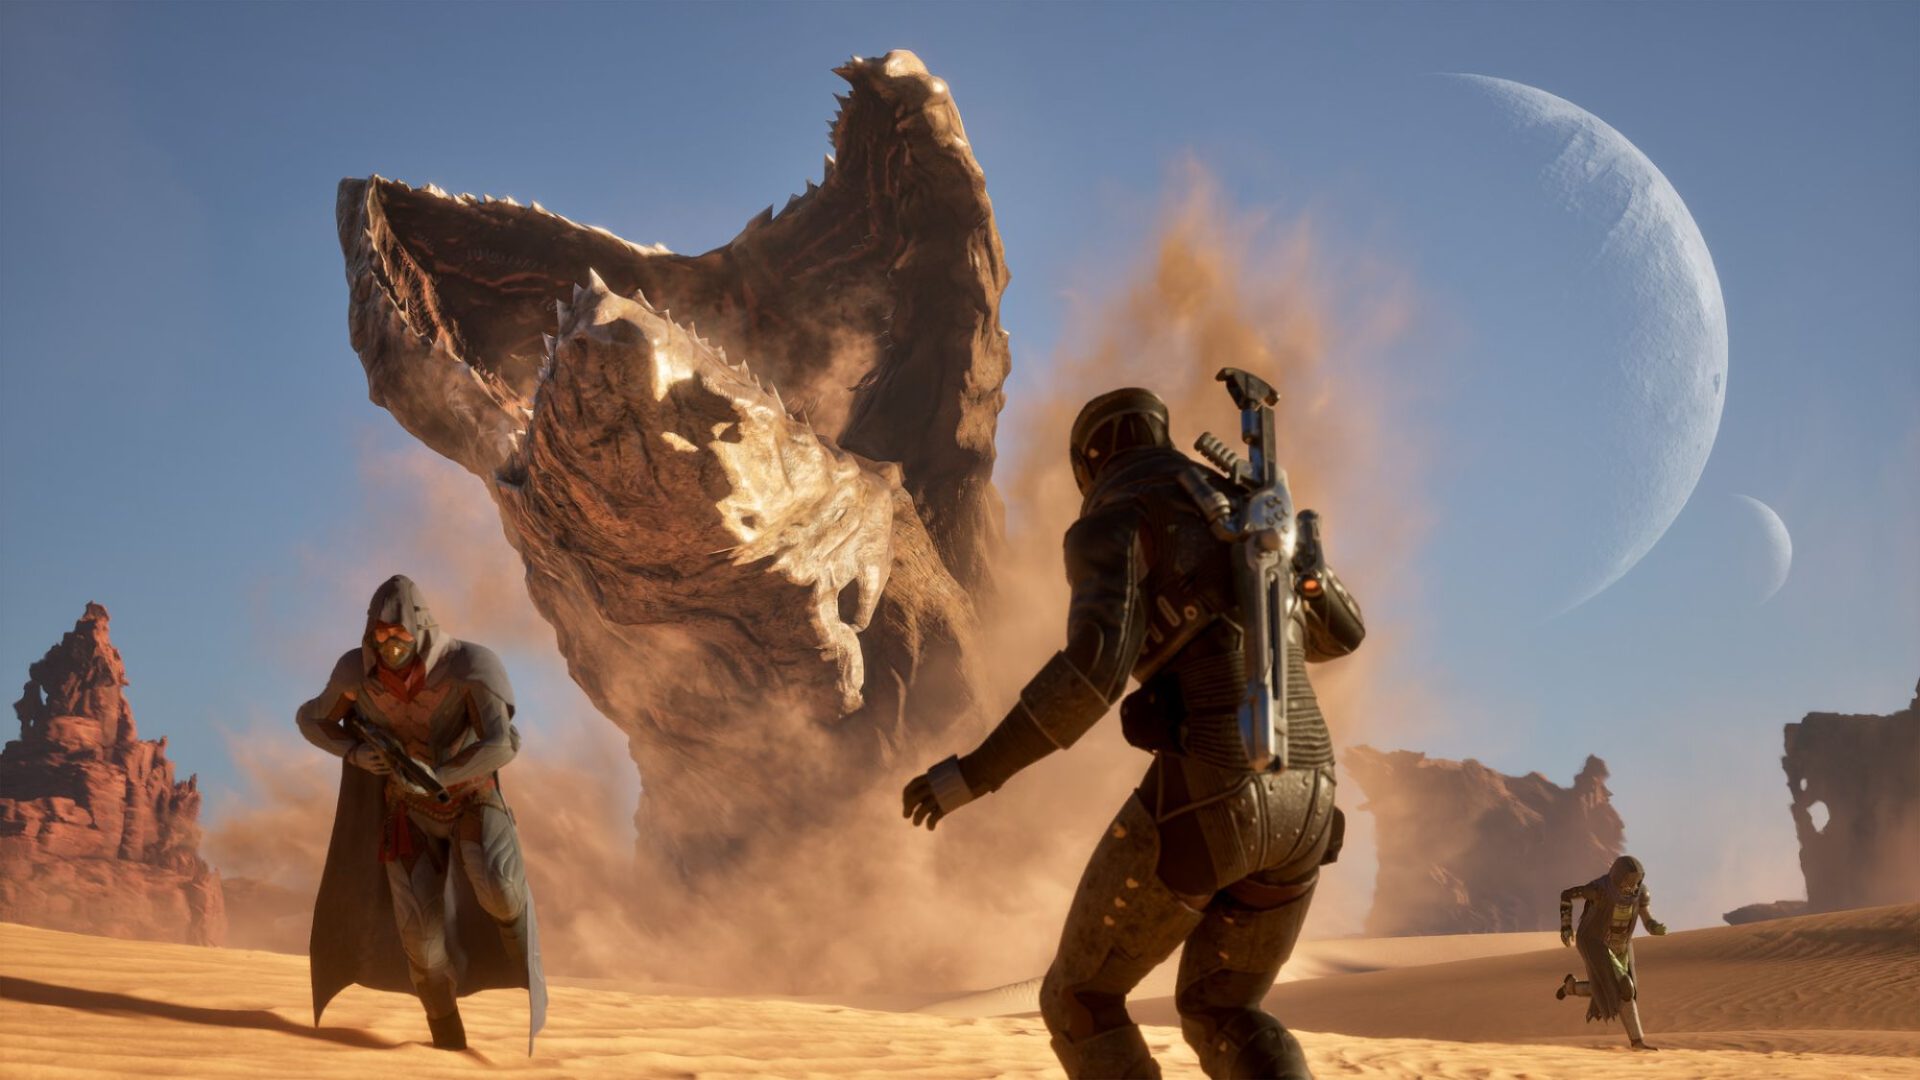 Dune Awakening will let you choose between the Harkonnen and Arrakis factions, plus a third arriving after launch